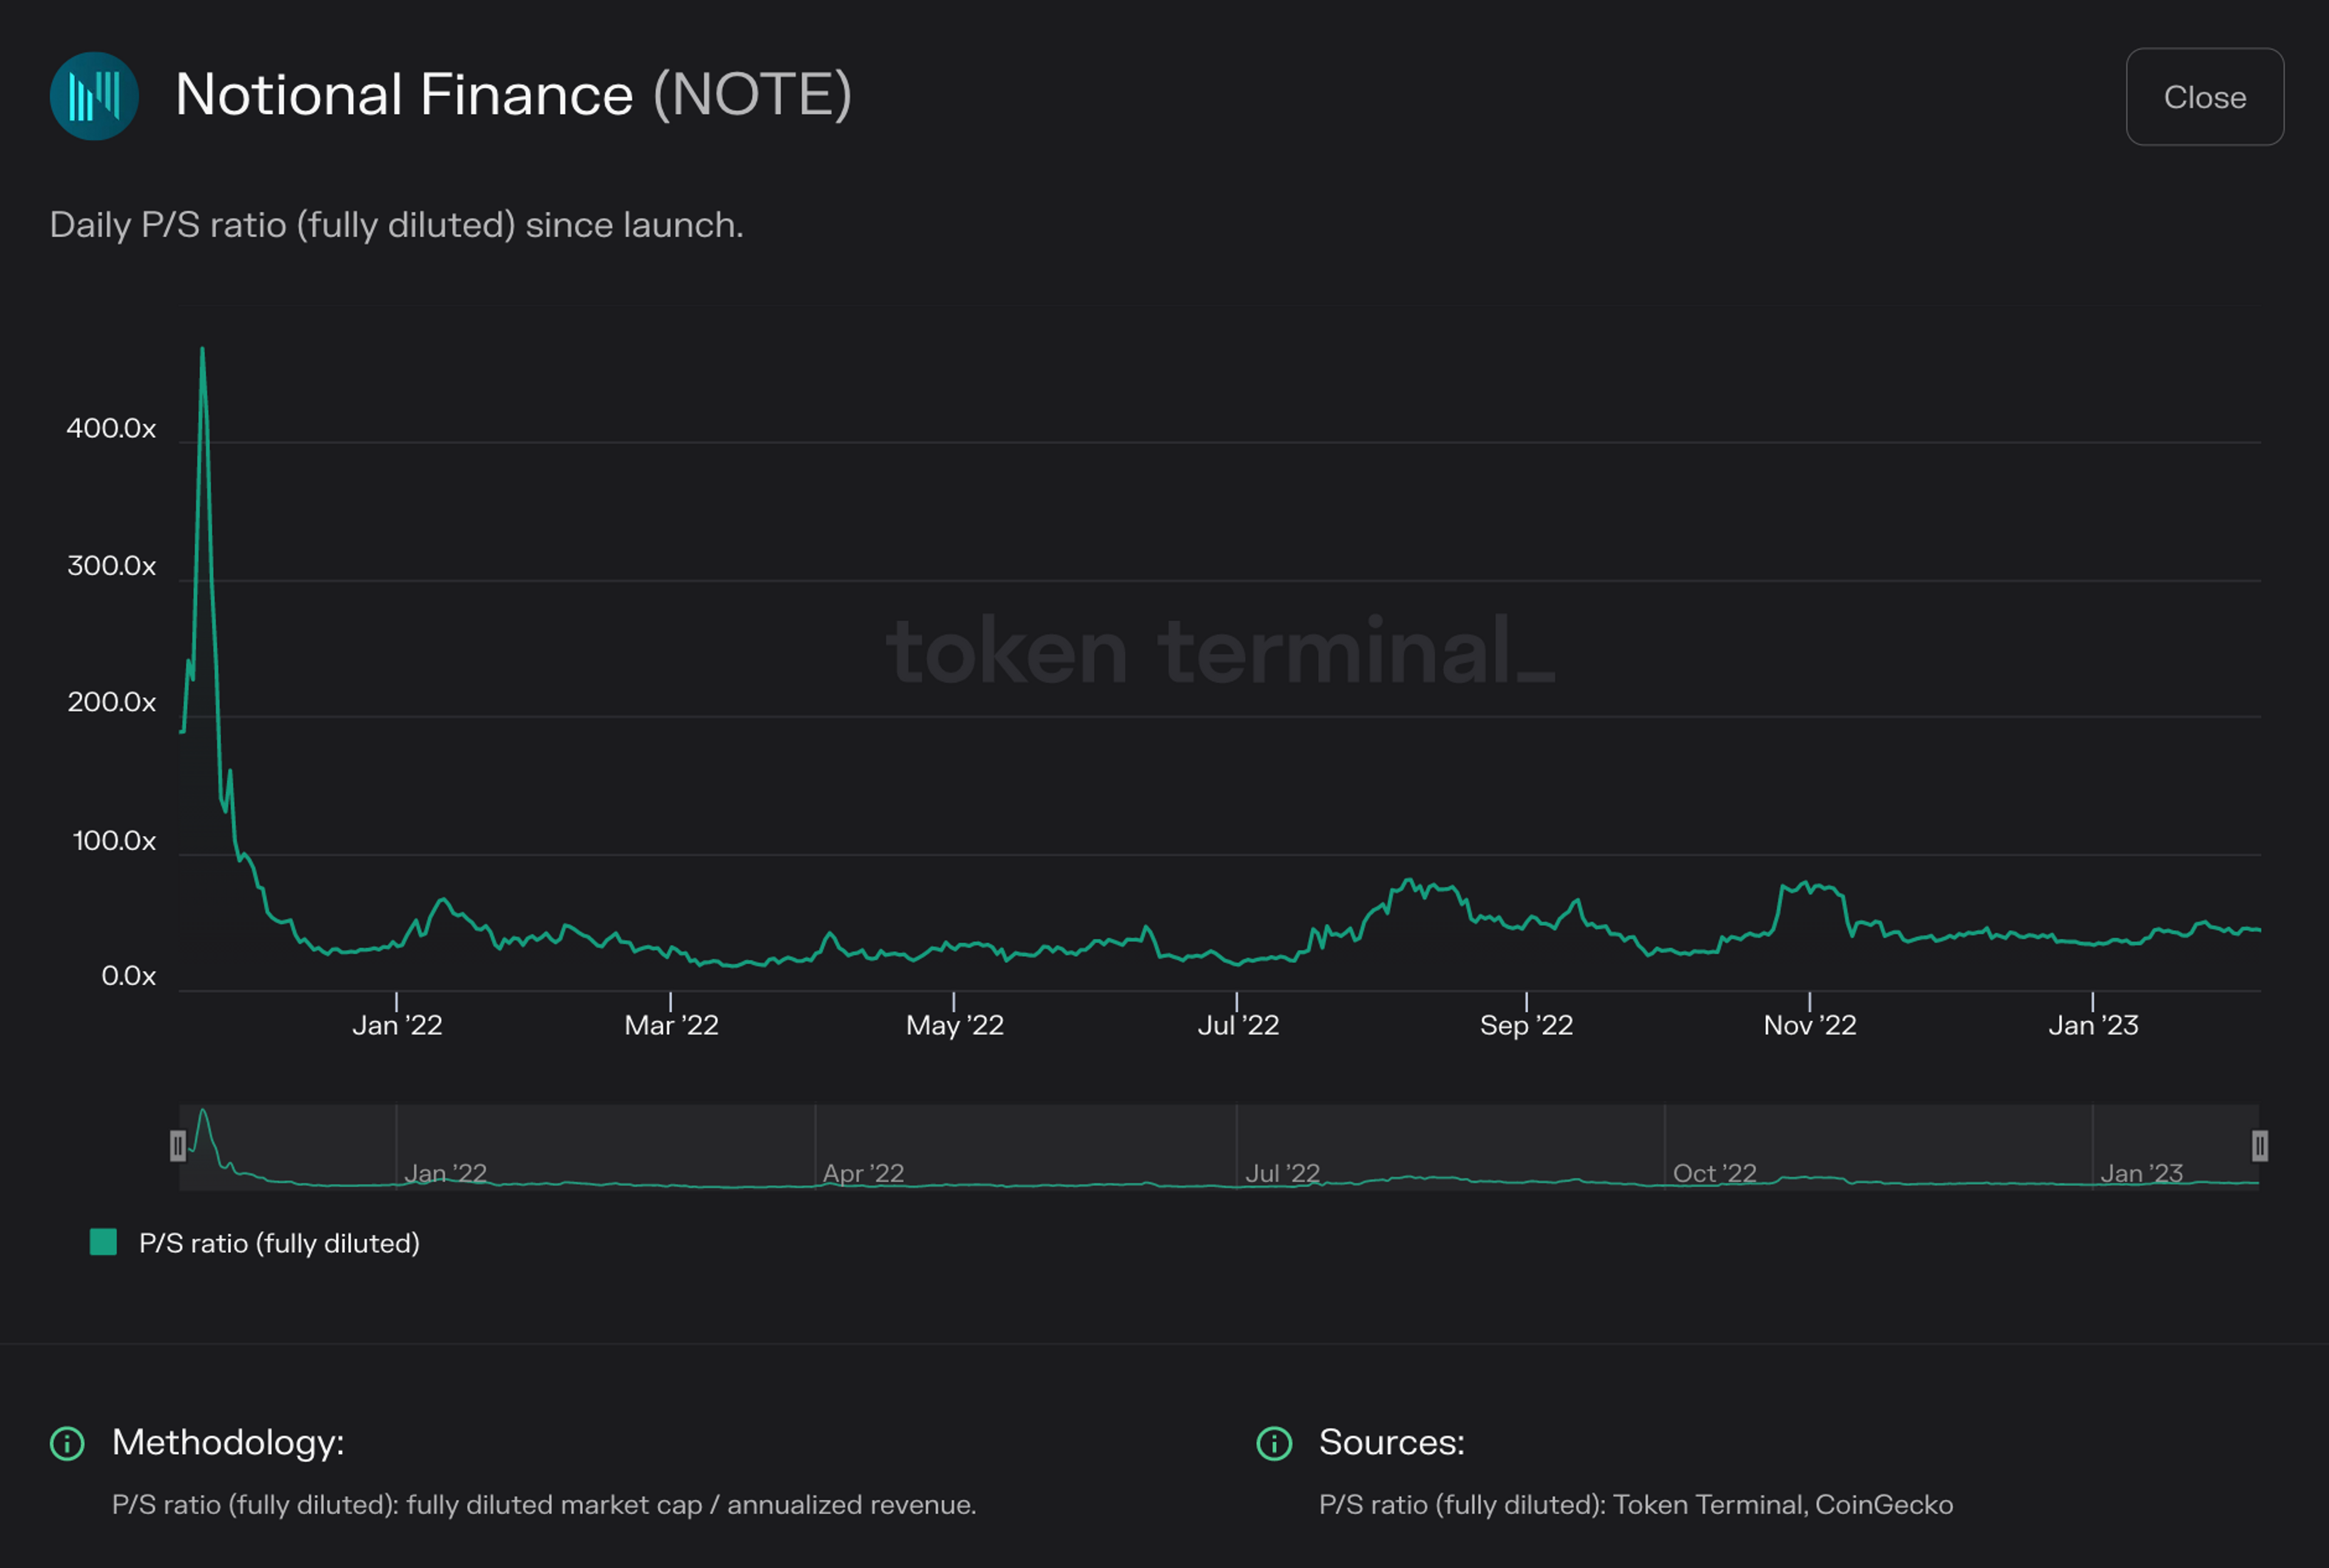 Chart of Notional Finance daily P/S ratio